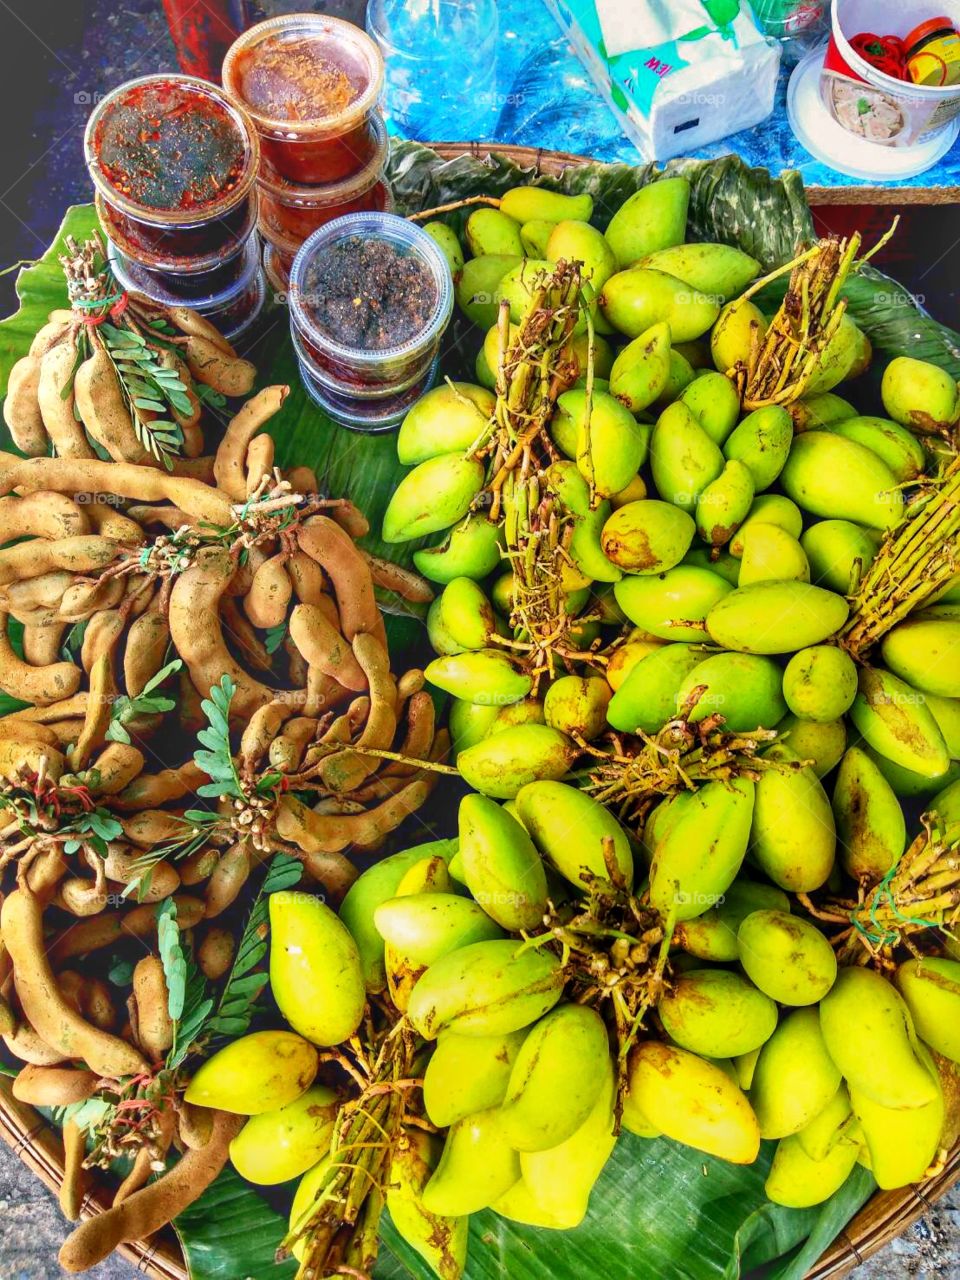 Mangoes and Tamarind for sale in the market.